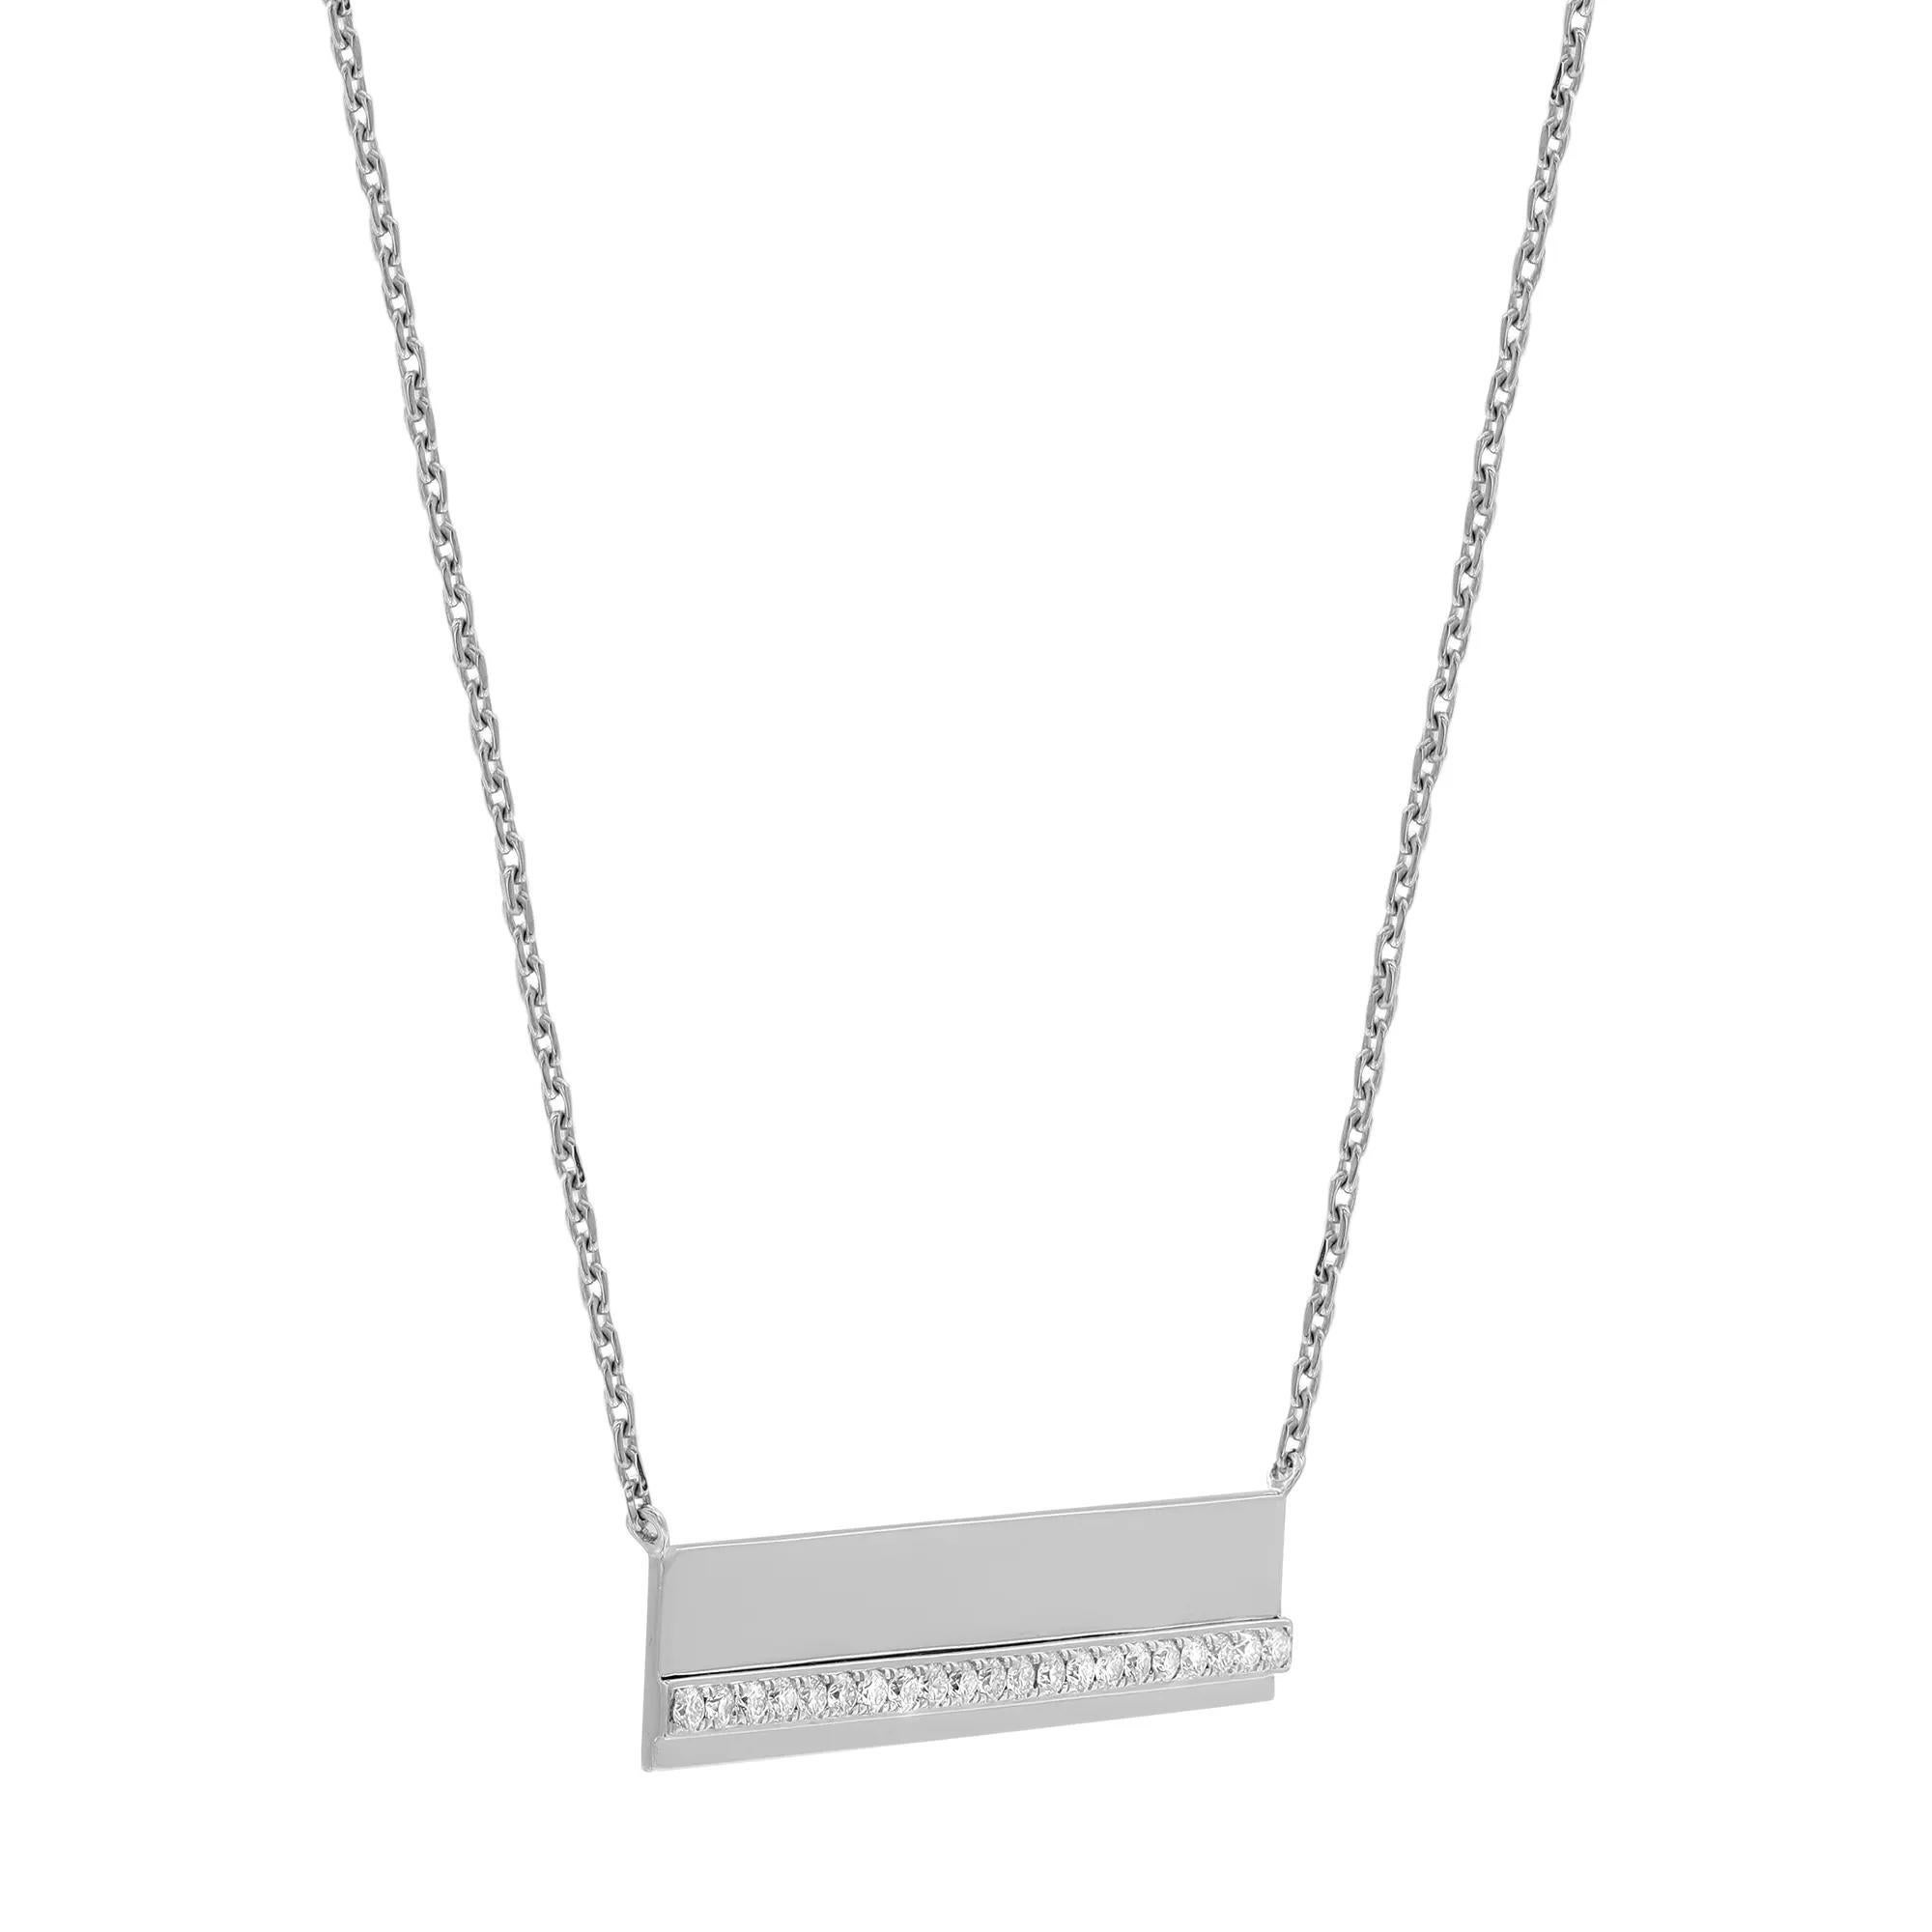 Elegant and alluring, this Messika Kate diamond horizontal bar chain necklace features a row of pave set round cut shimmering white diamonds weighing 0.36 carat. Diamond quality: G color and VS clarity. Crafted in fine 18K white gold. The necklace